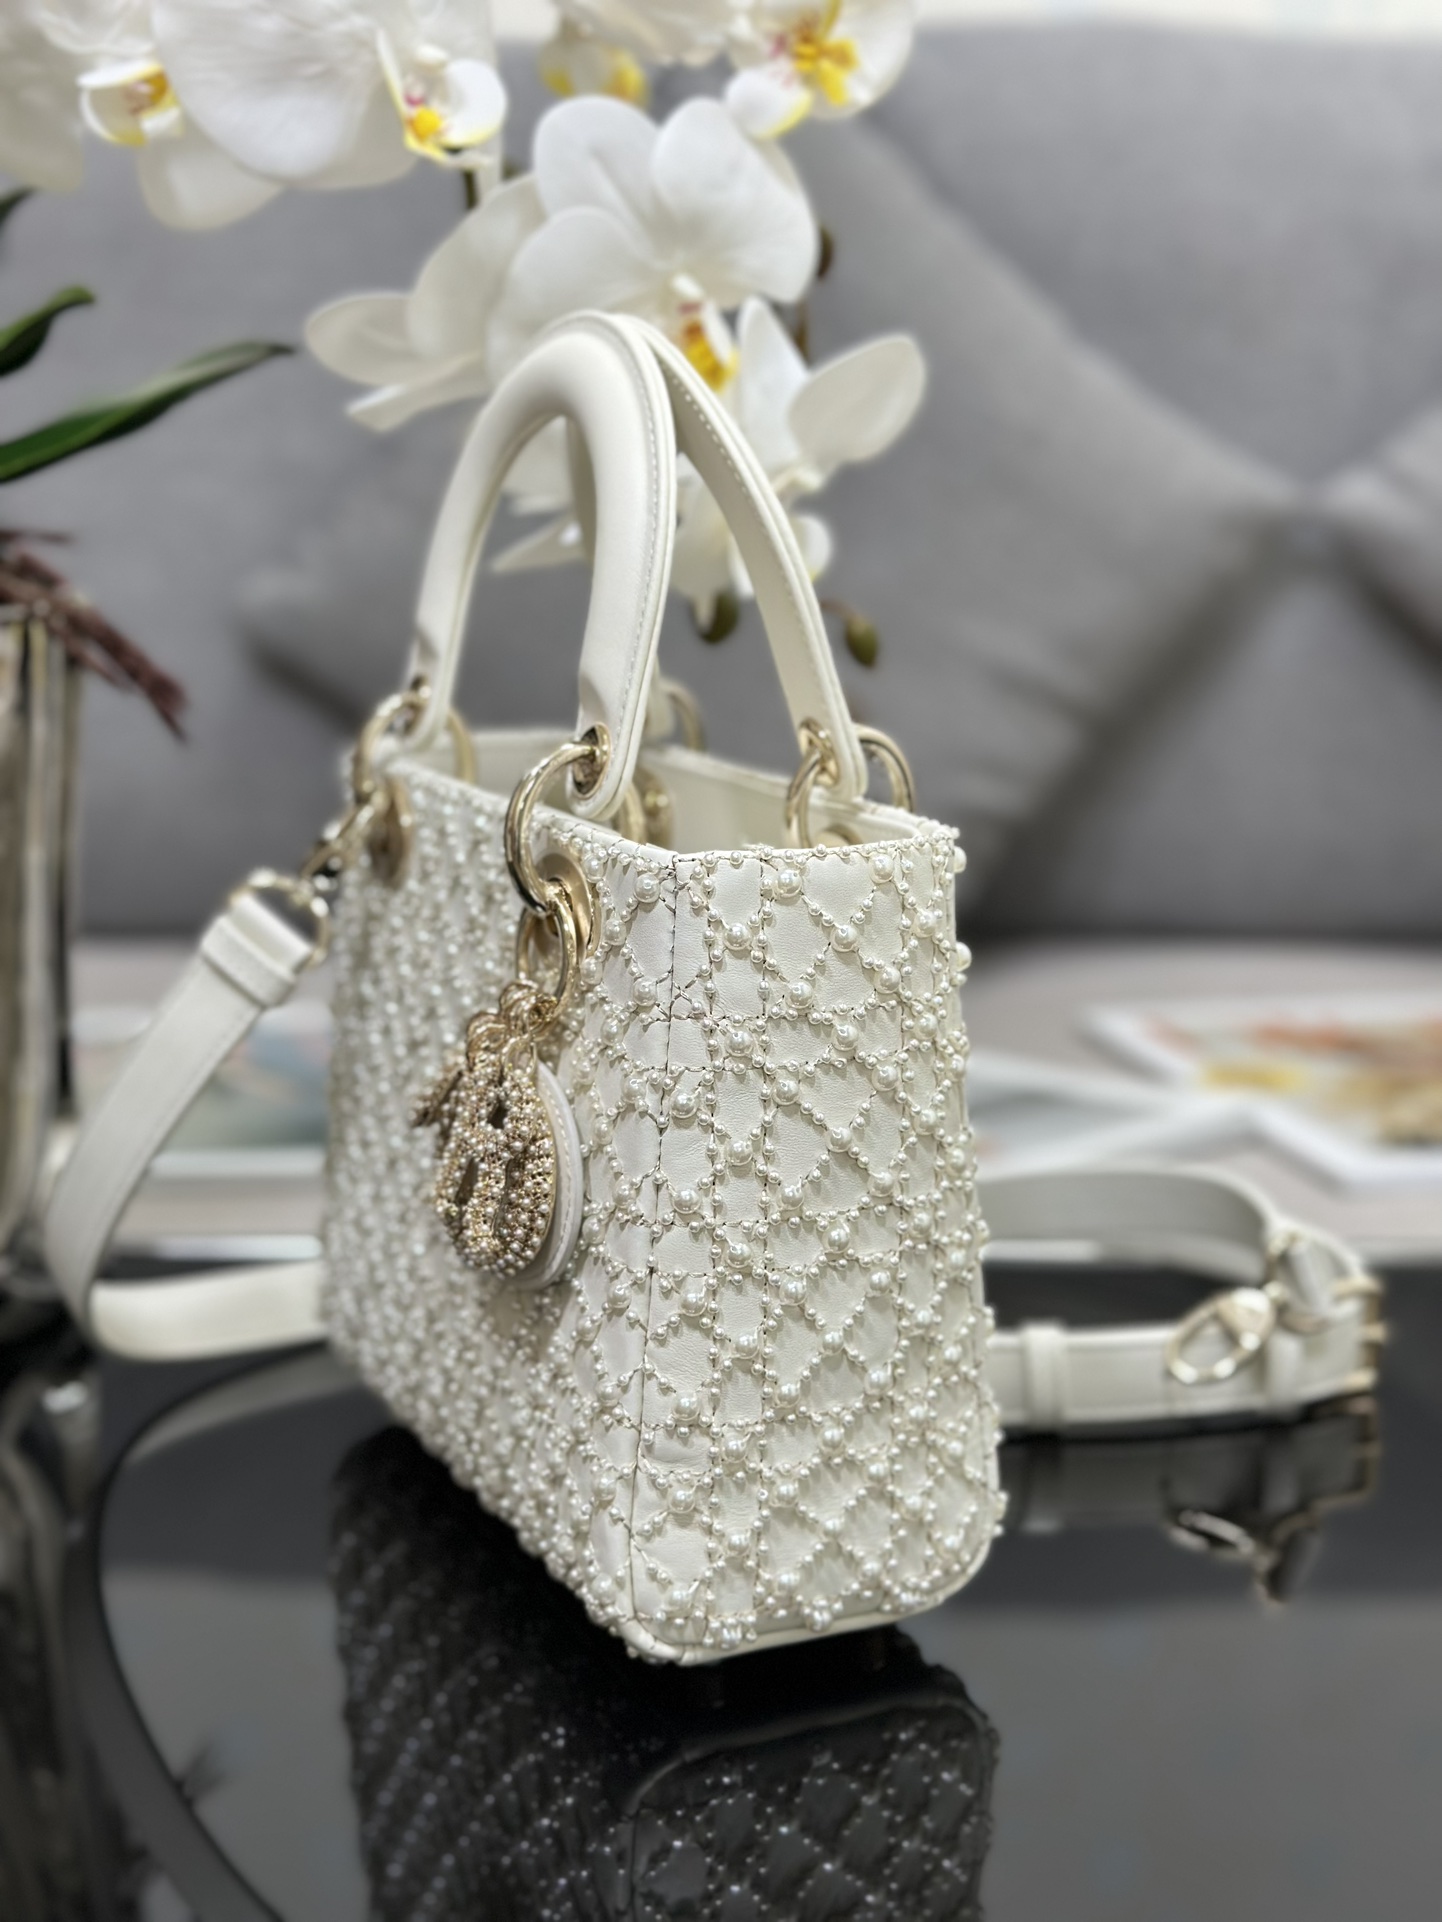 Replica Lady DIOR Bag with Four squares embroider half a pearl